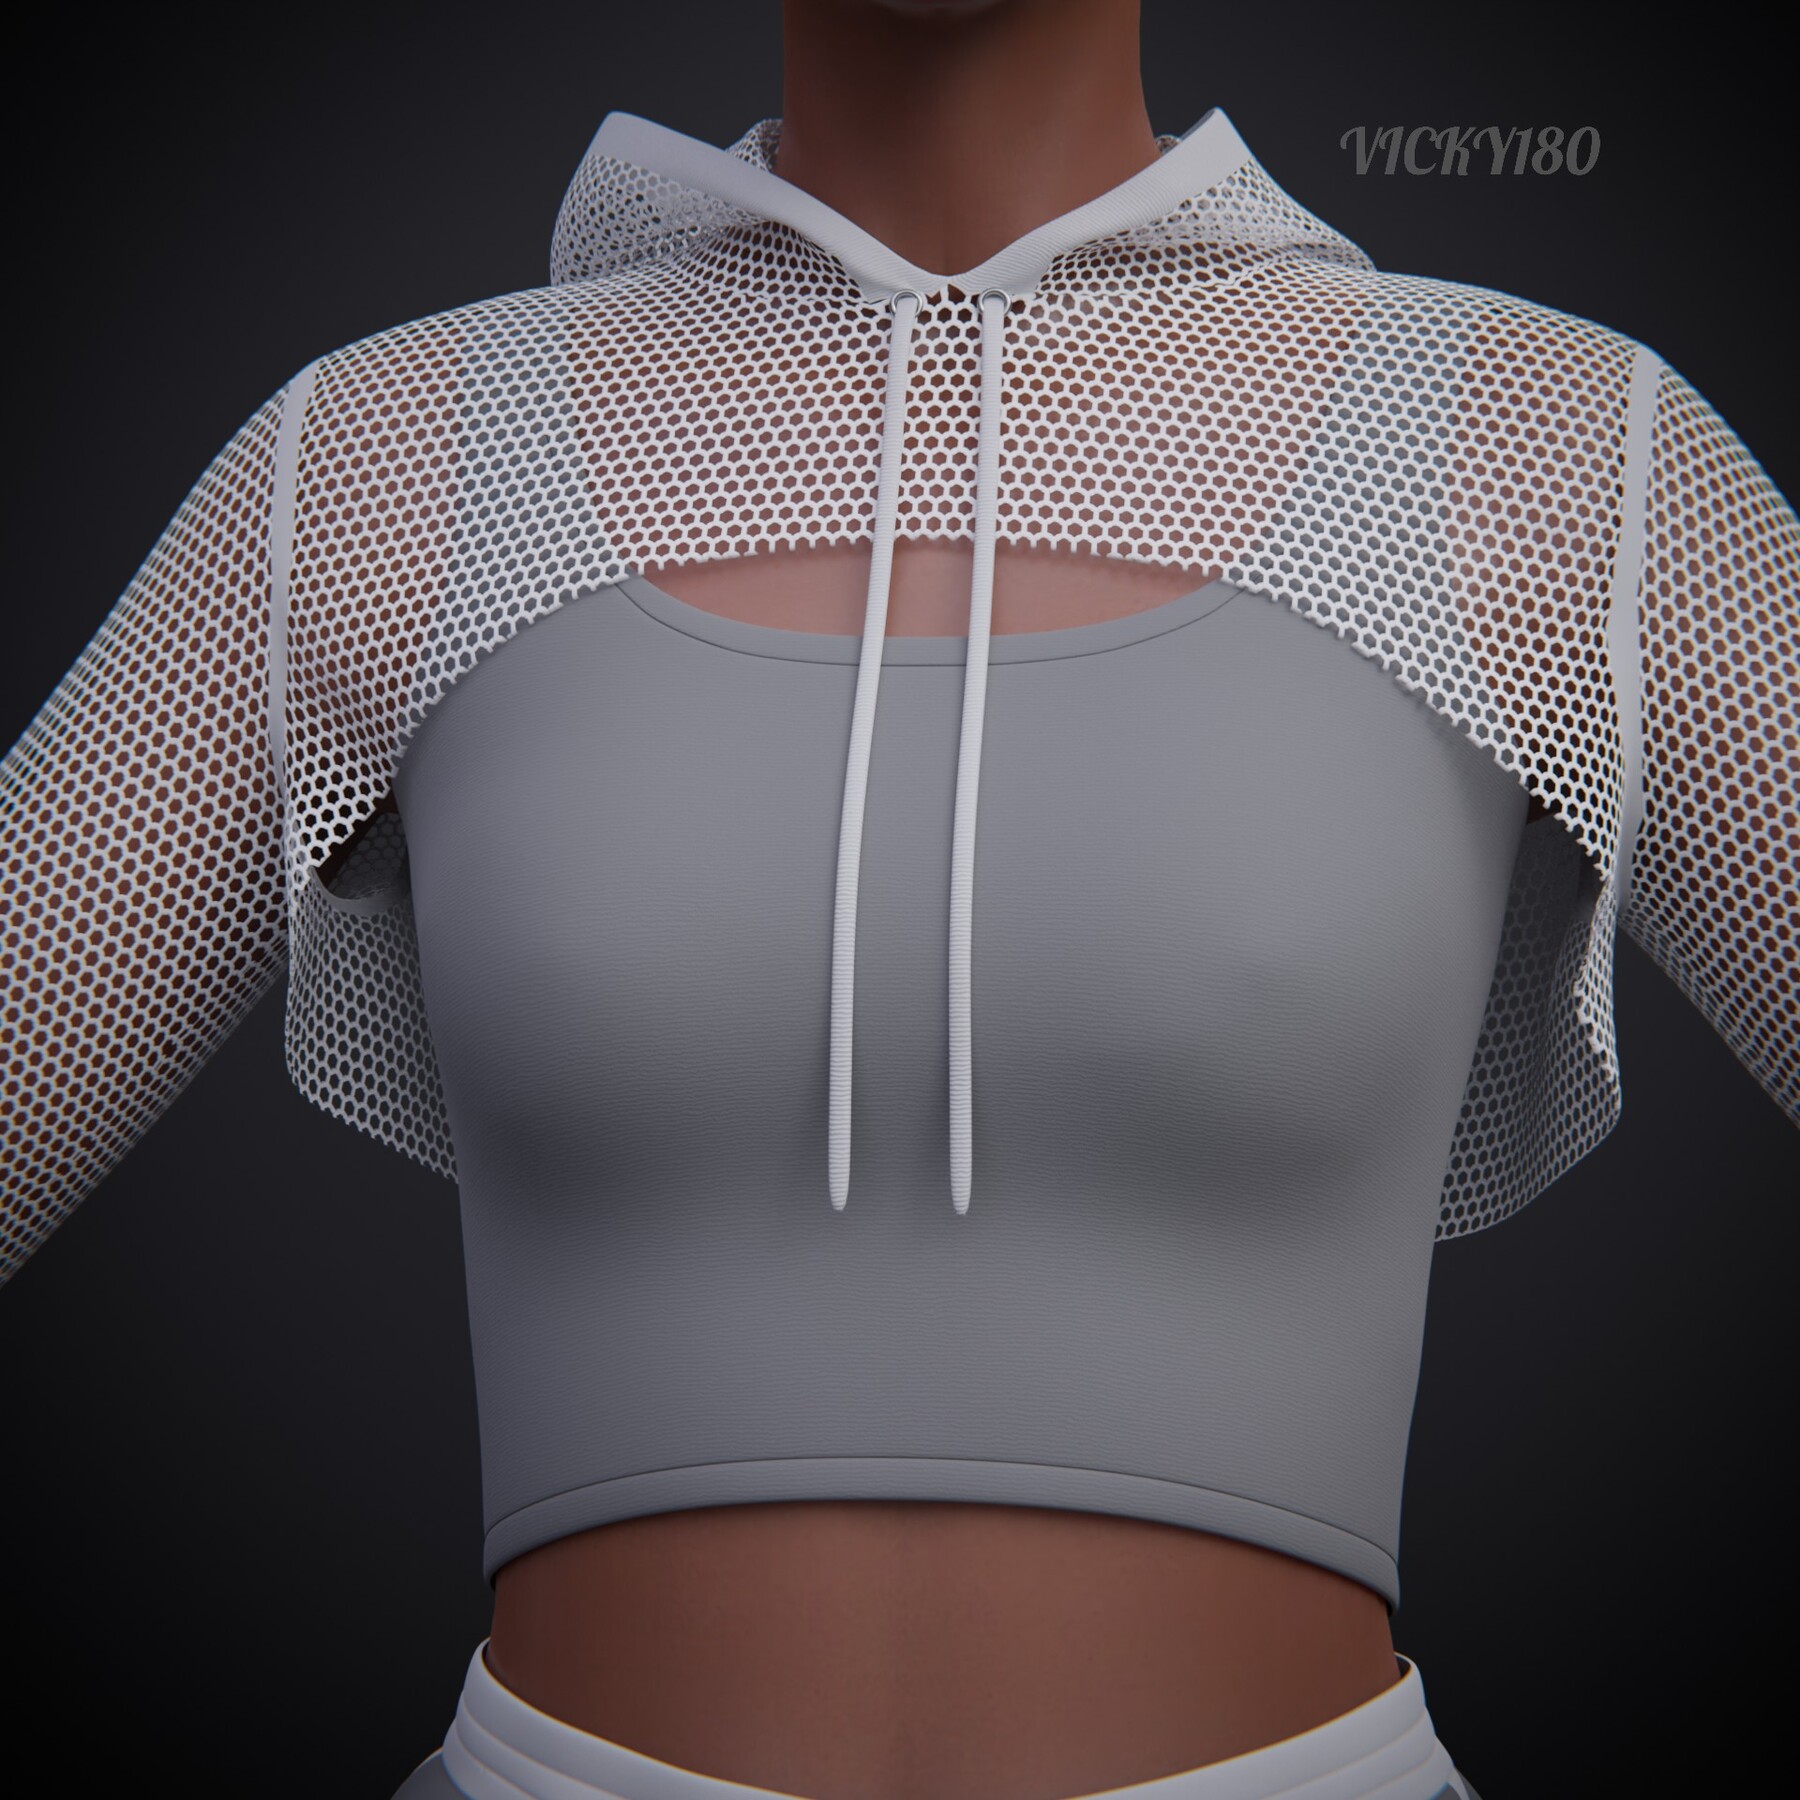 ArtStation - High Crop Hoodie and Jersey Outfit